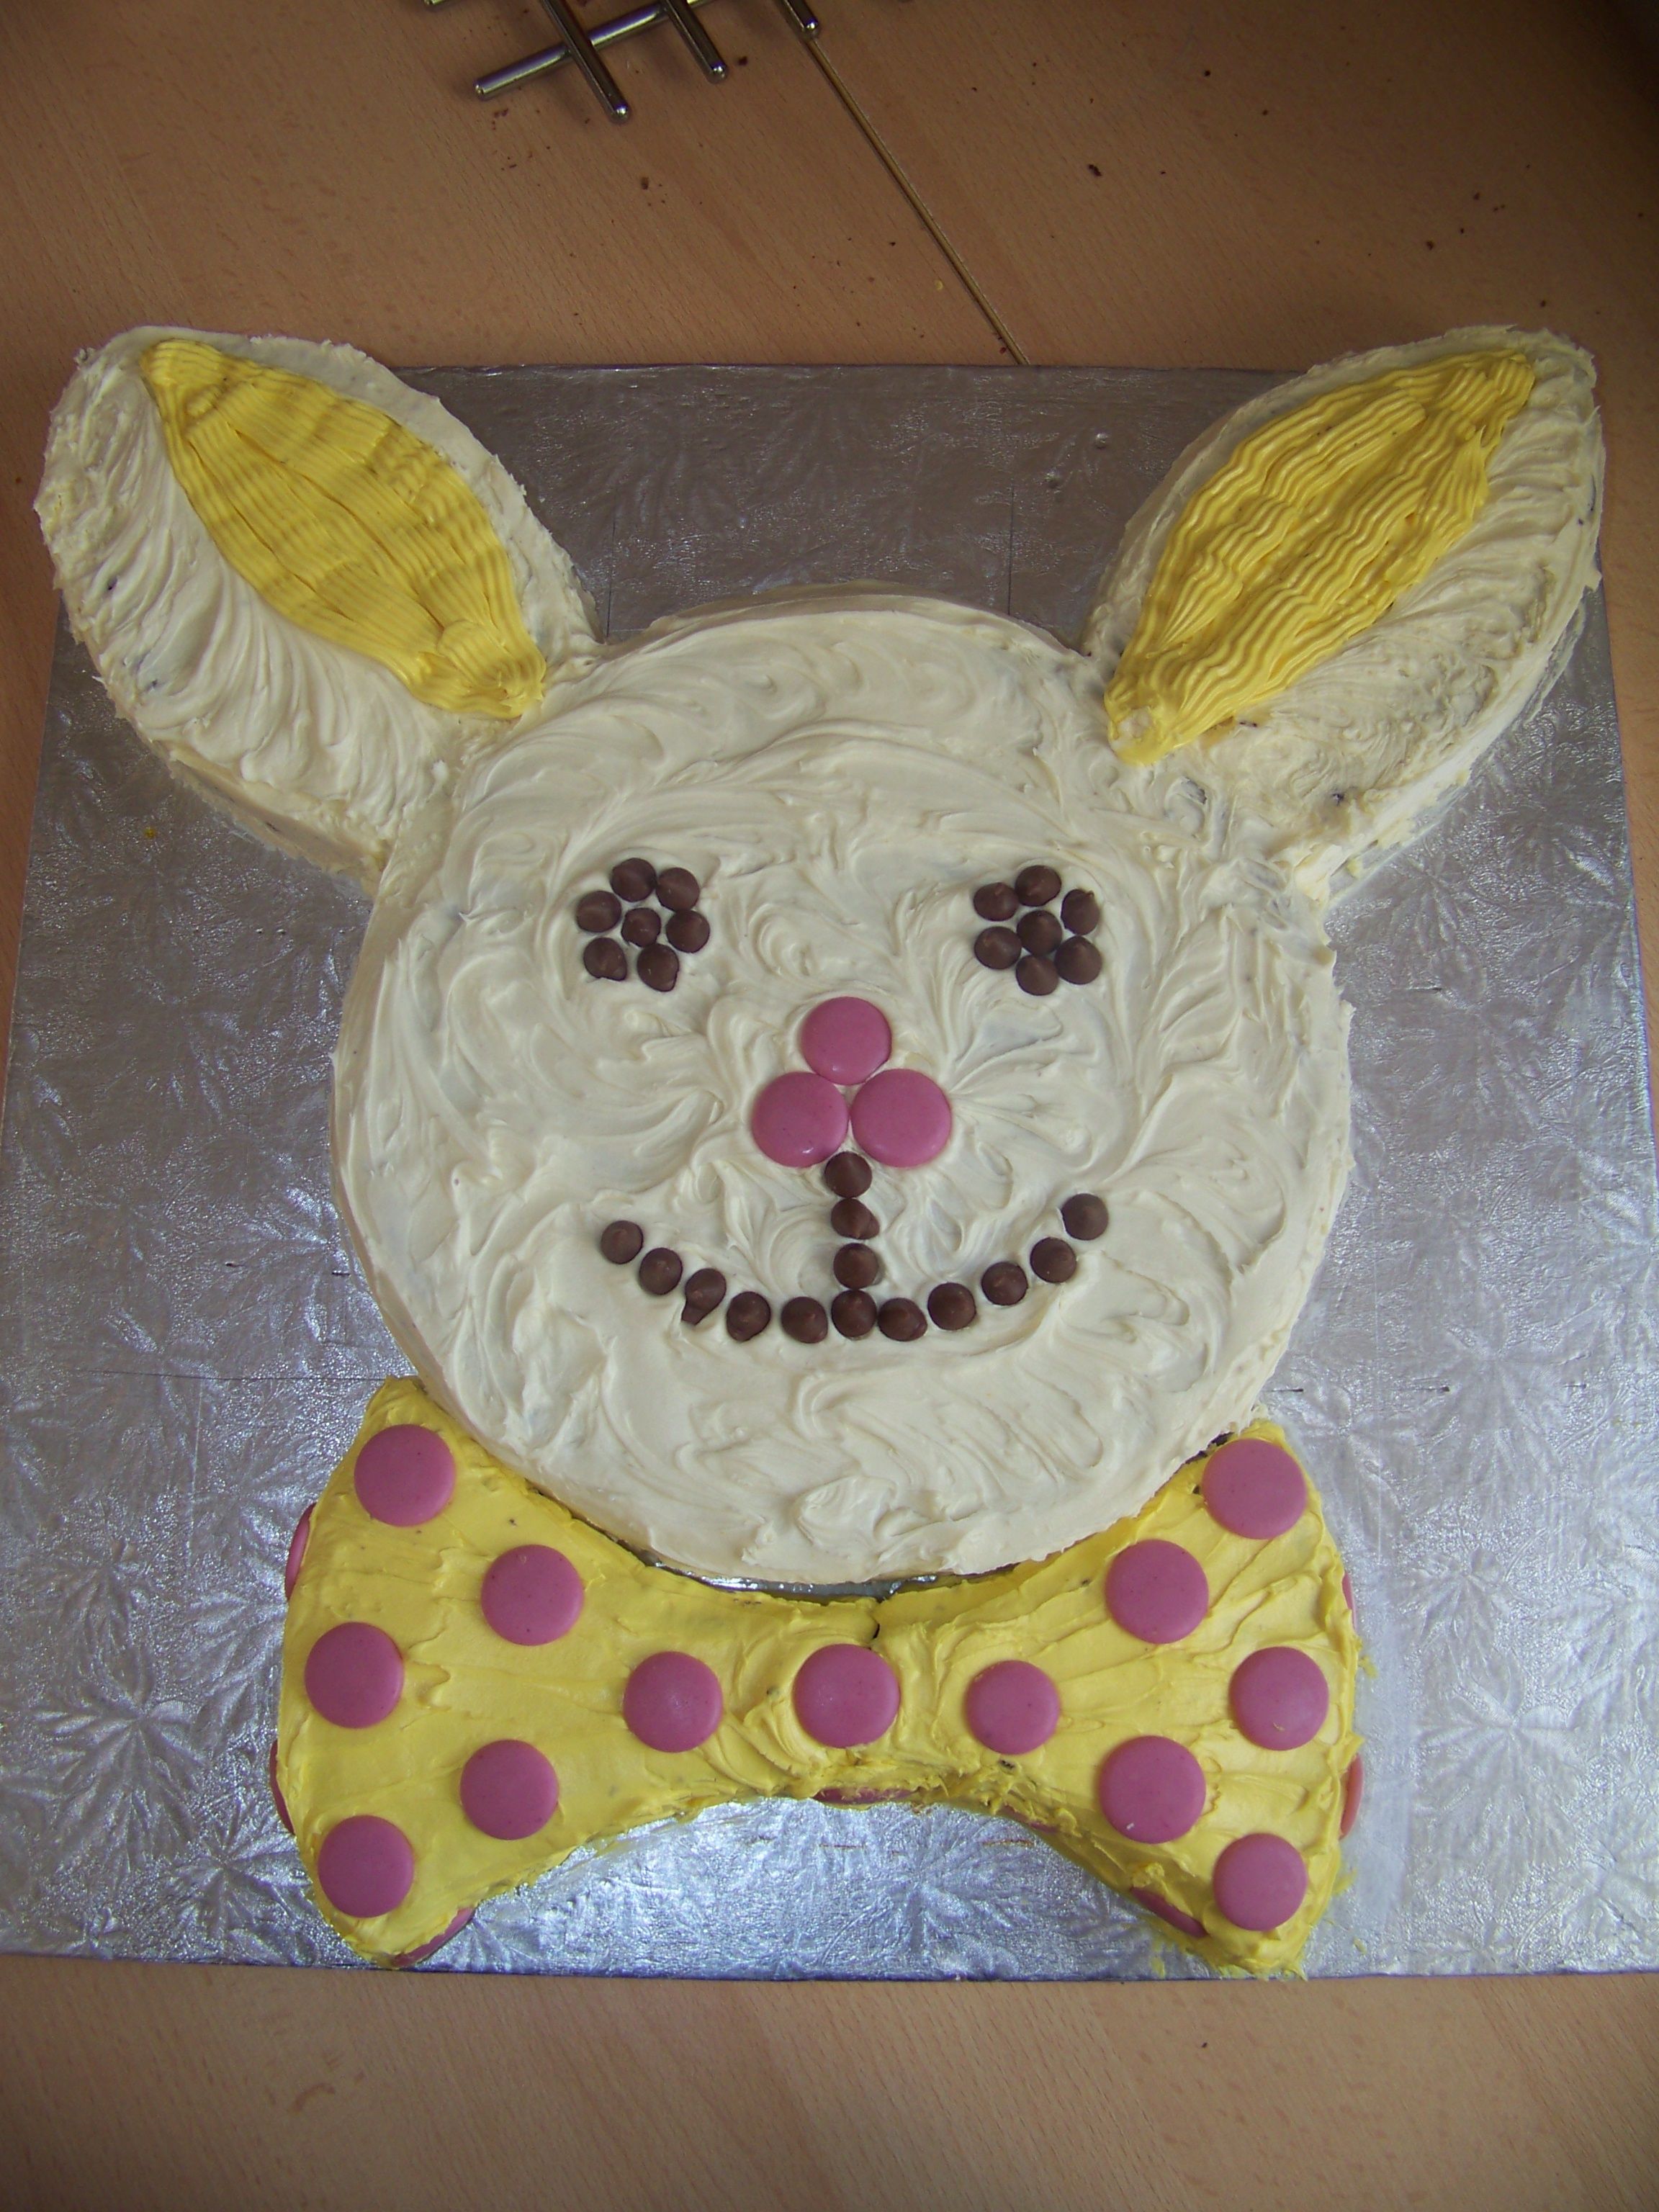 Bunny Cake with Round Cake Pans